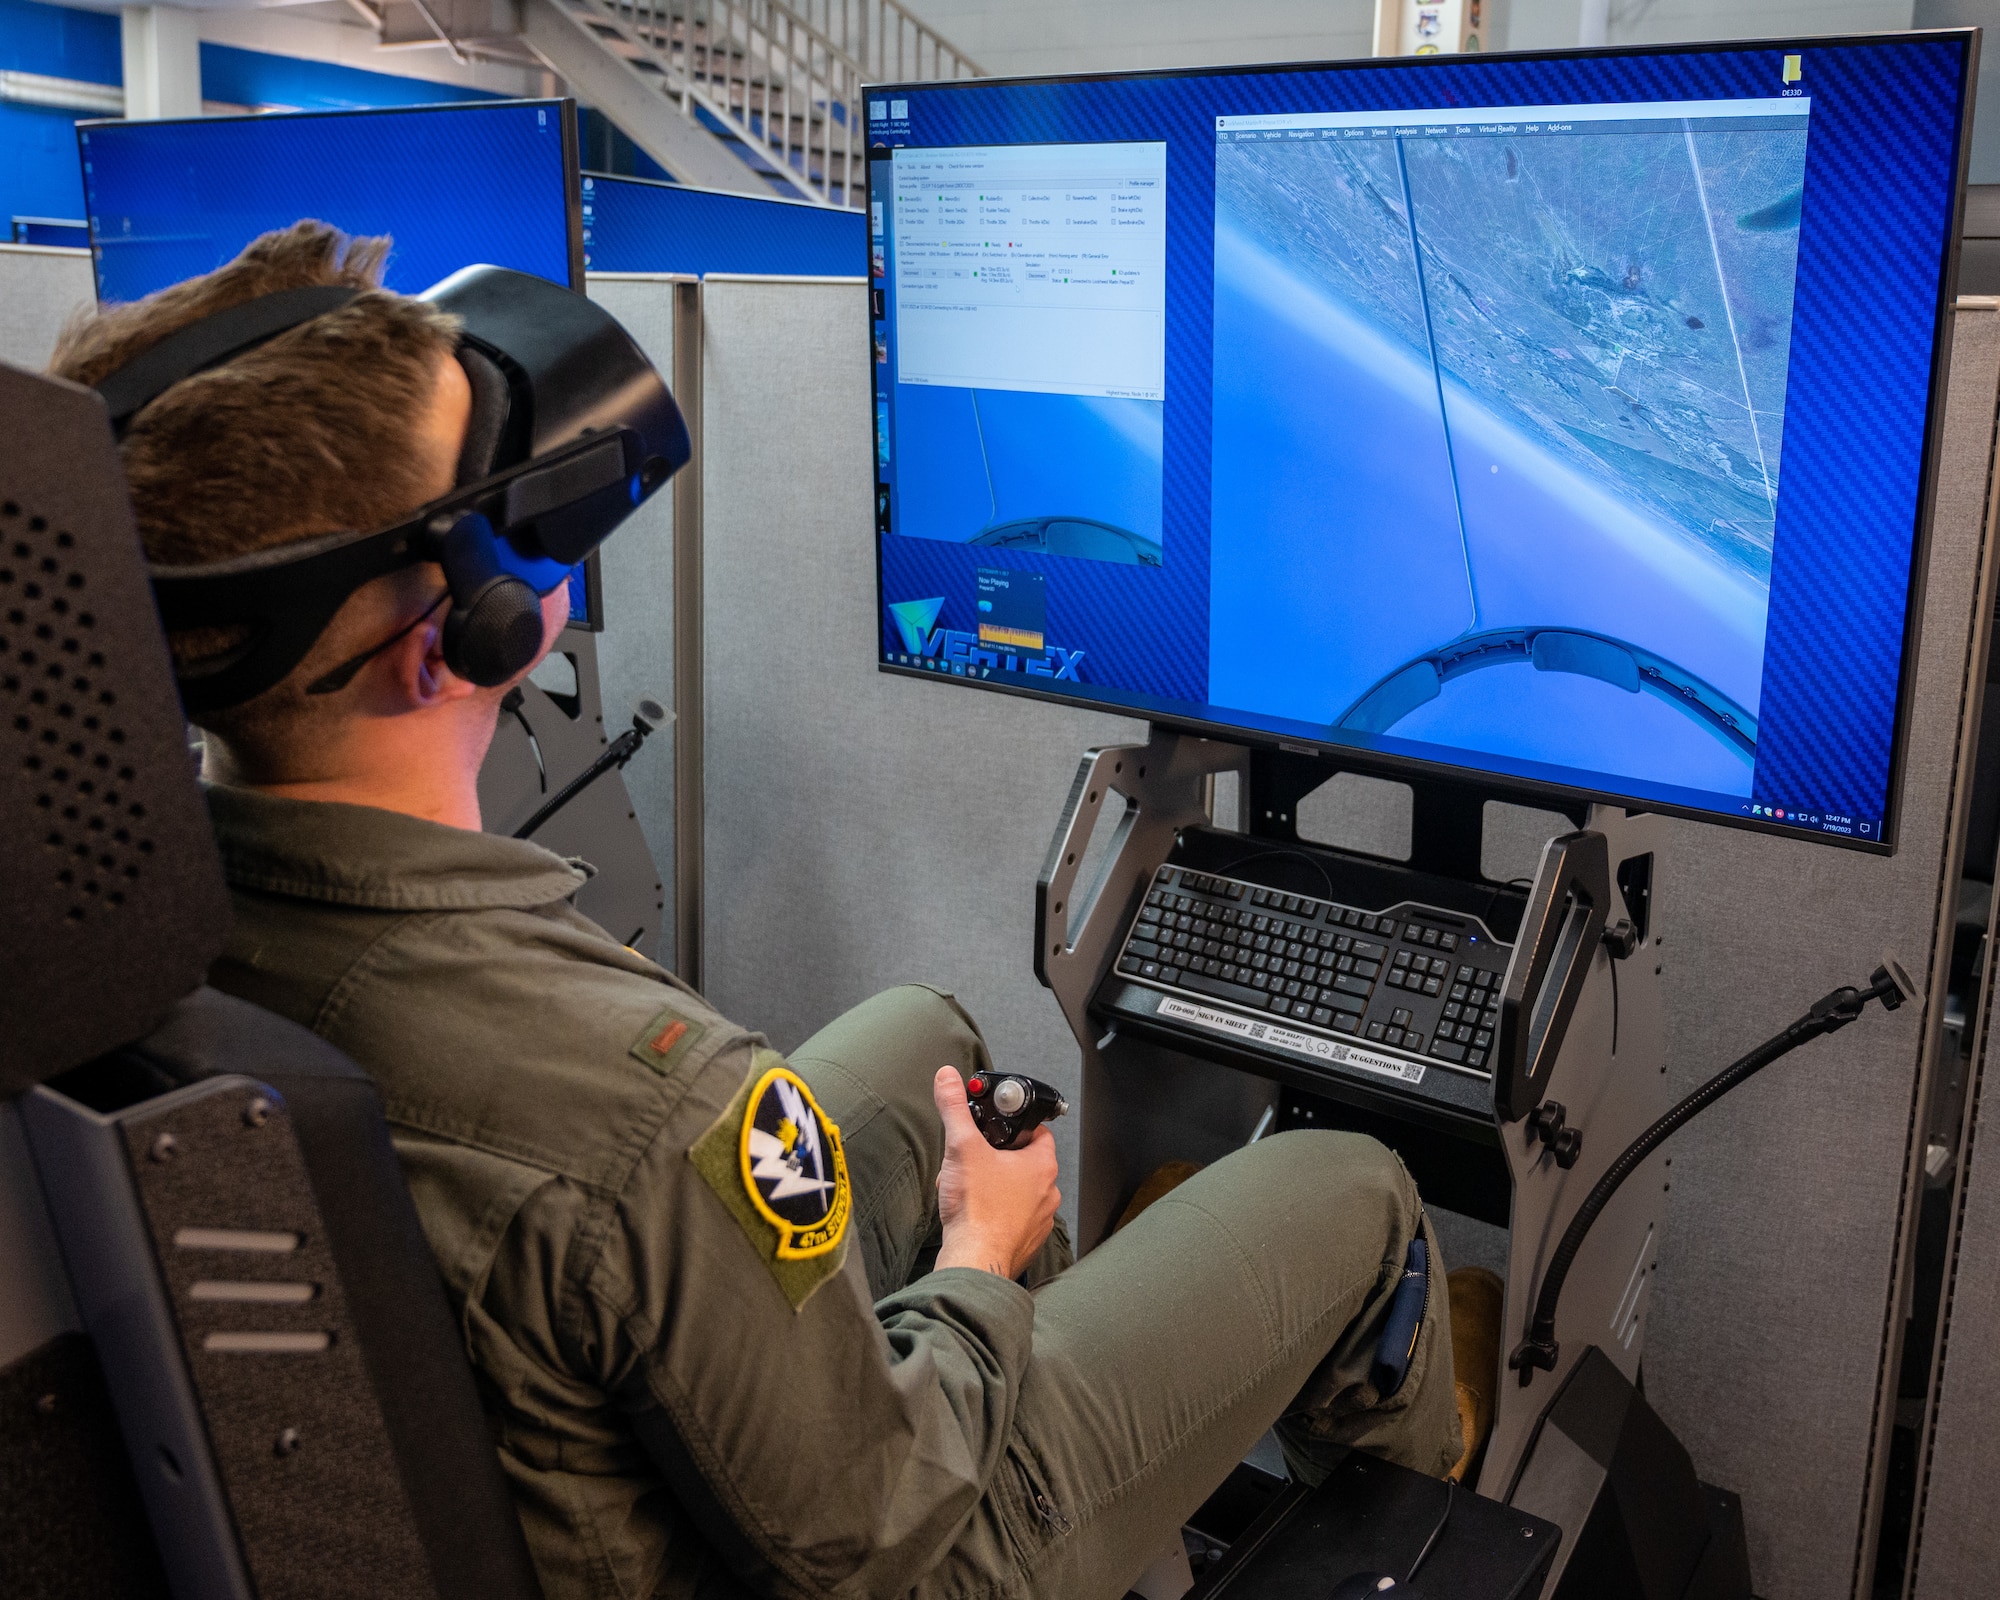 U.S. Air Force 2nd Lt. Christian Lobiondo, 47th Student Squadron student pilot, takes off in a T-6 Texan II in virtual reality at Laughlin Air Force Base, Texas, July 20, 2023. VR units have been installed into classrooms at Laughlin, allowing students to rapidly practice lessons taught earlier. (U.S. Air Force photo by Senior Airman Nicholas Larsen)